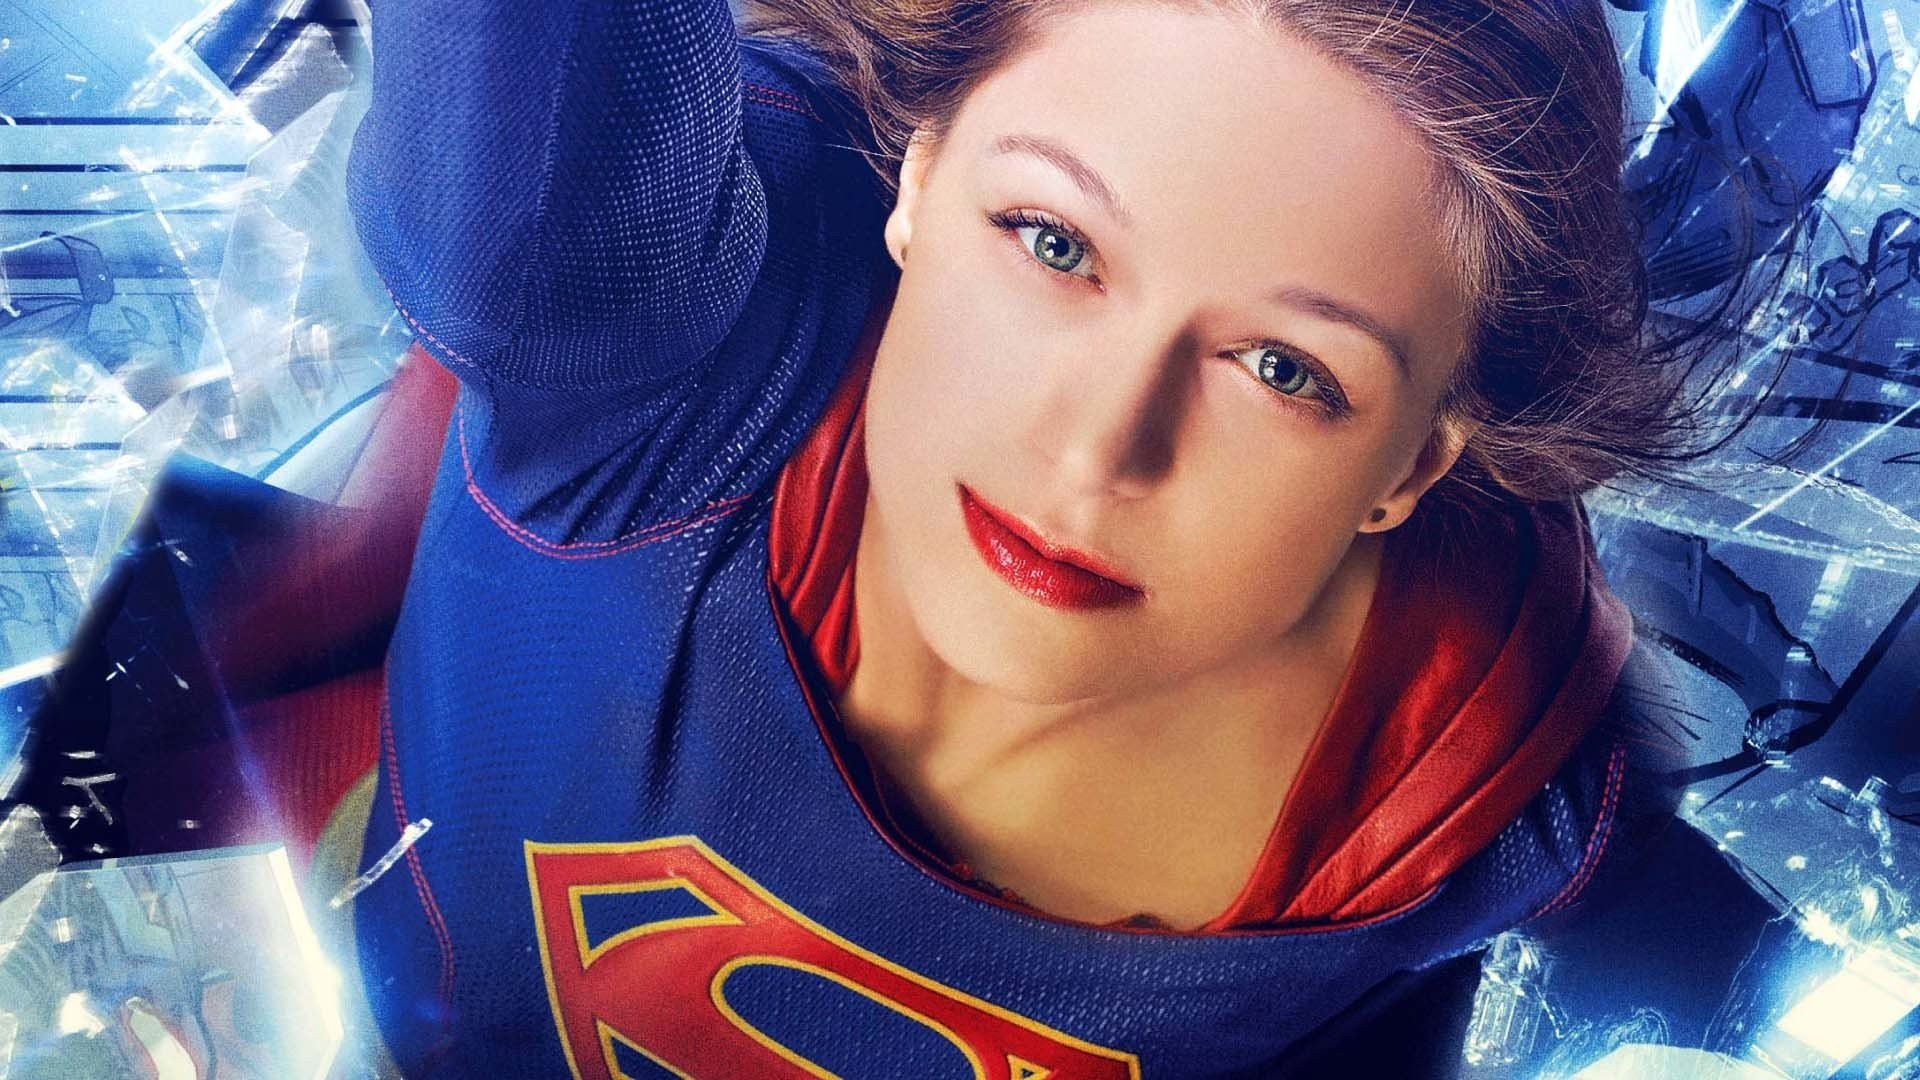 Best Supergirl Wallpaper with high-resolution 1920x1080 pixel. You can use this wallpaper for your Windows and Mac OS computers as well as your Android and iPhone smartphones